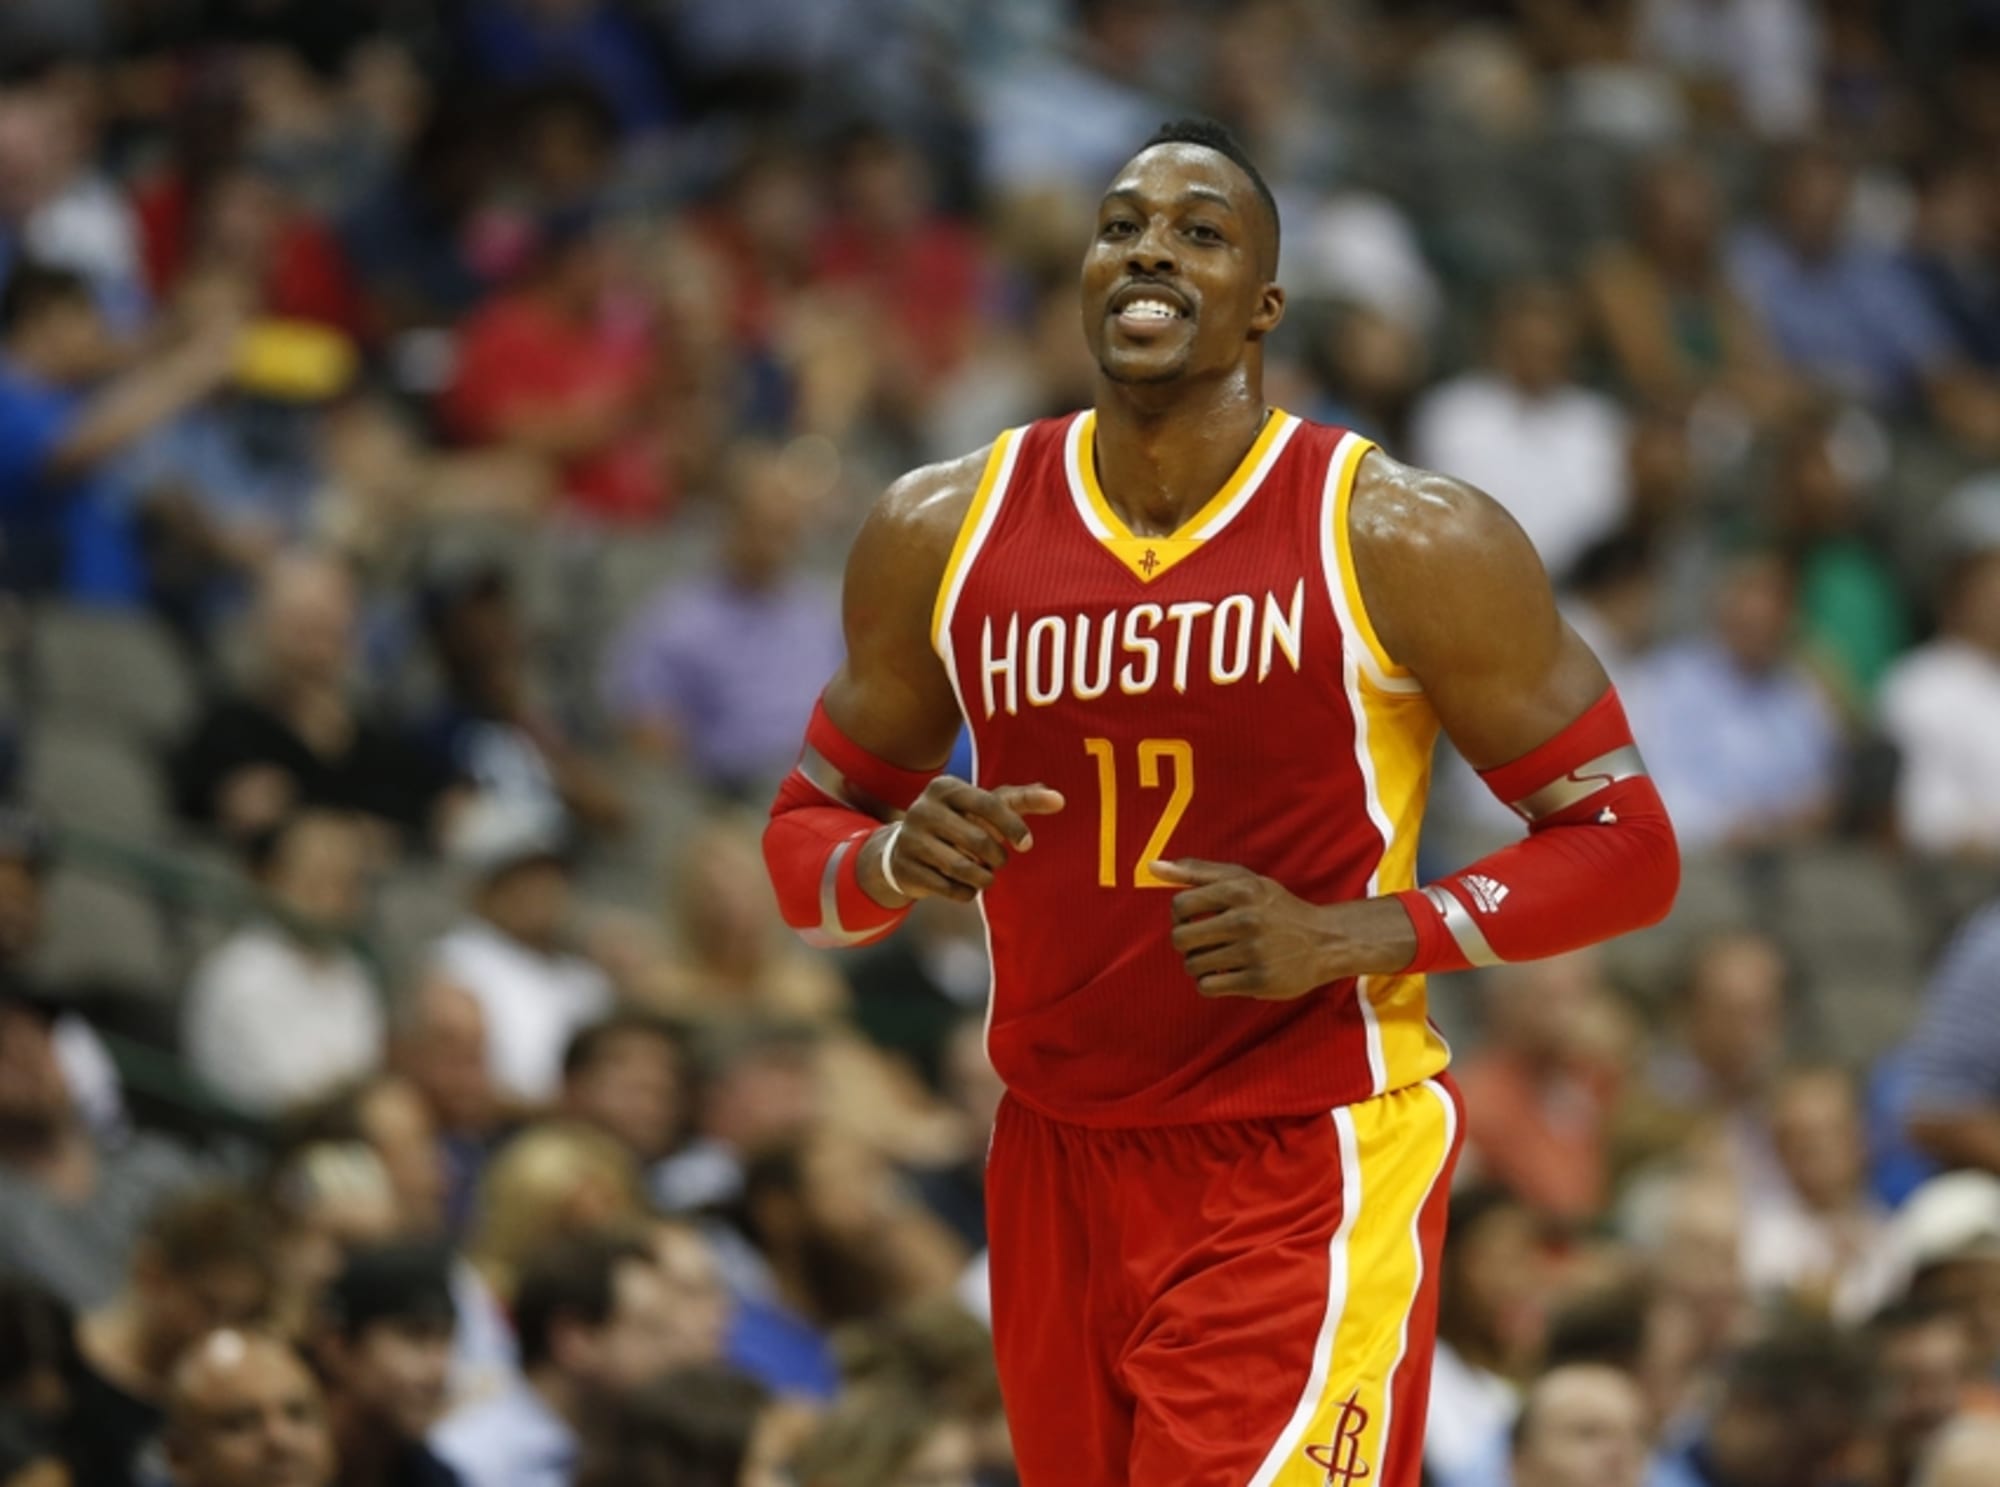 Dwight Howard's return stirs up good, bad memories with Rockets